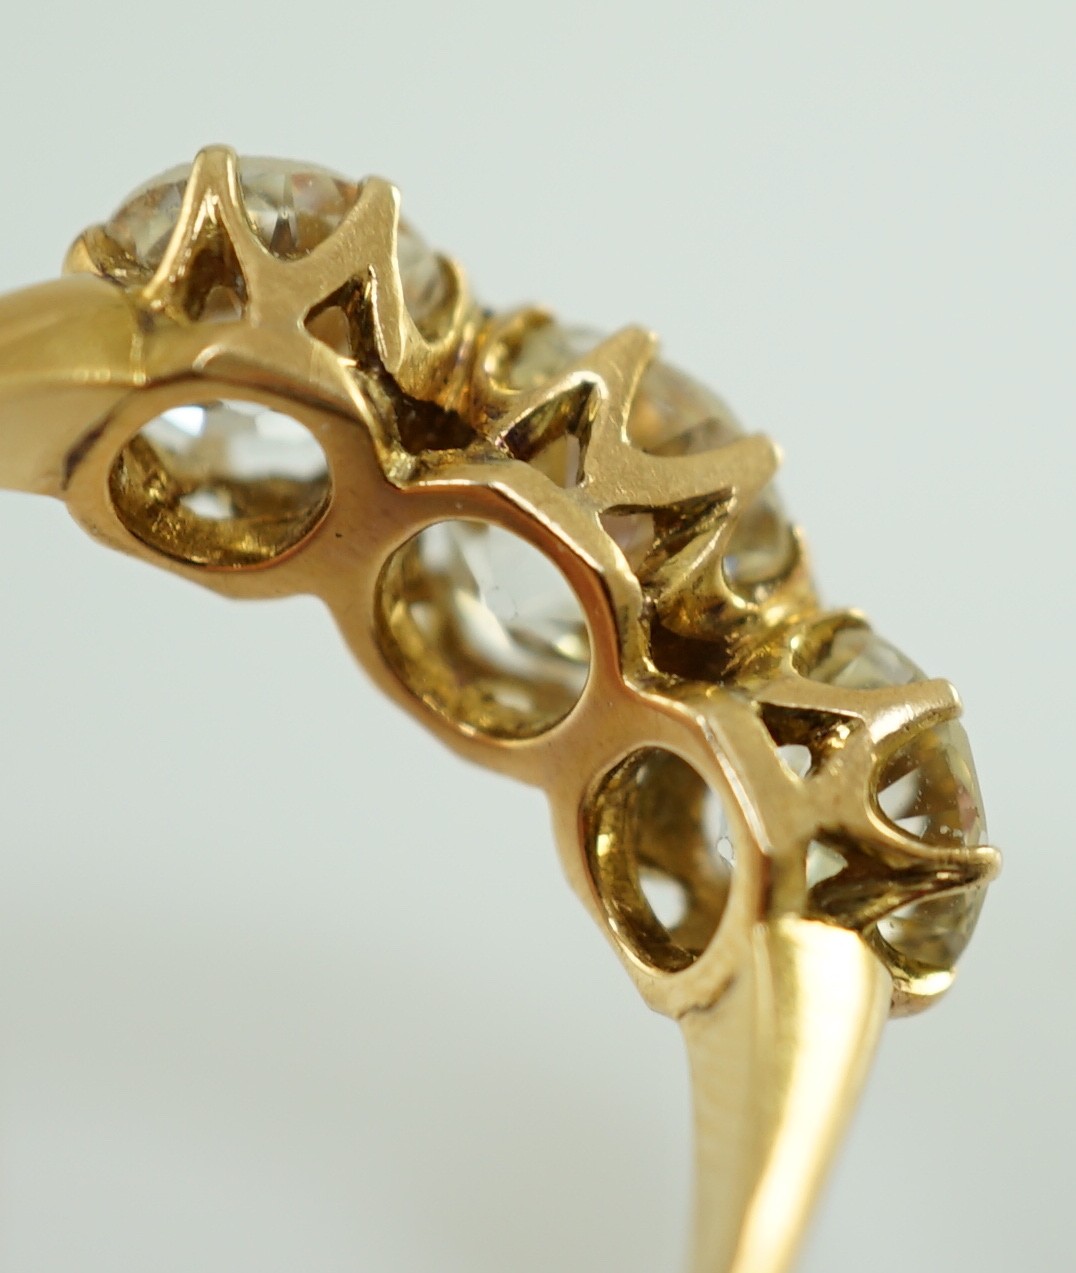 A gold and three stone diamond ring